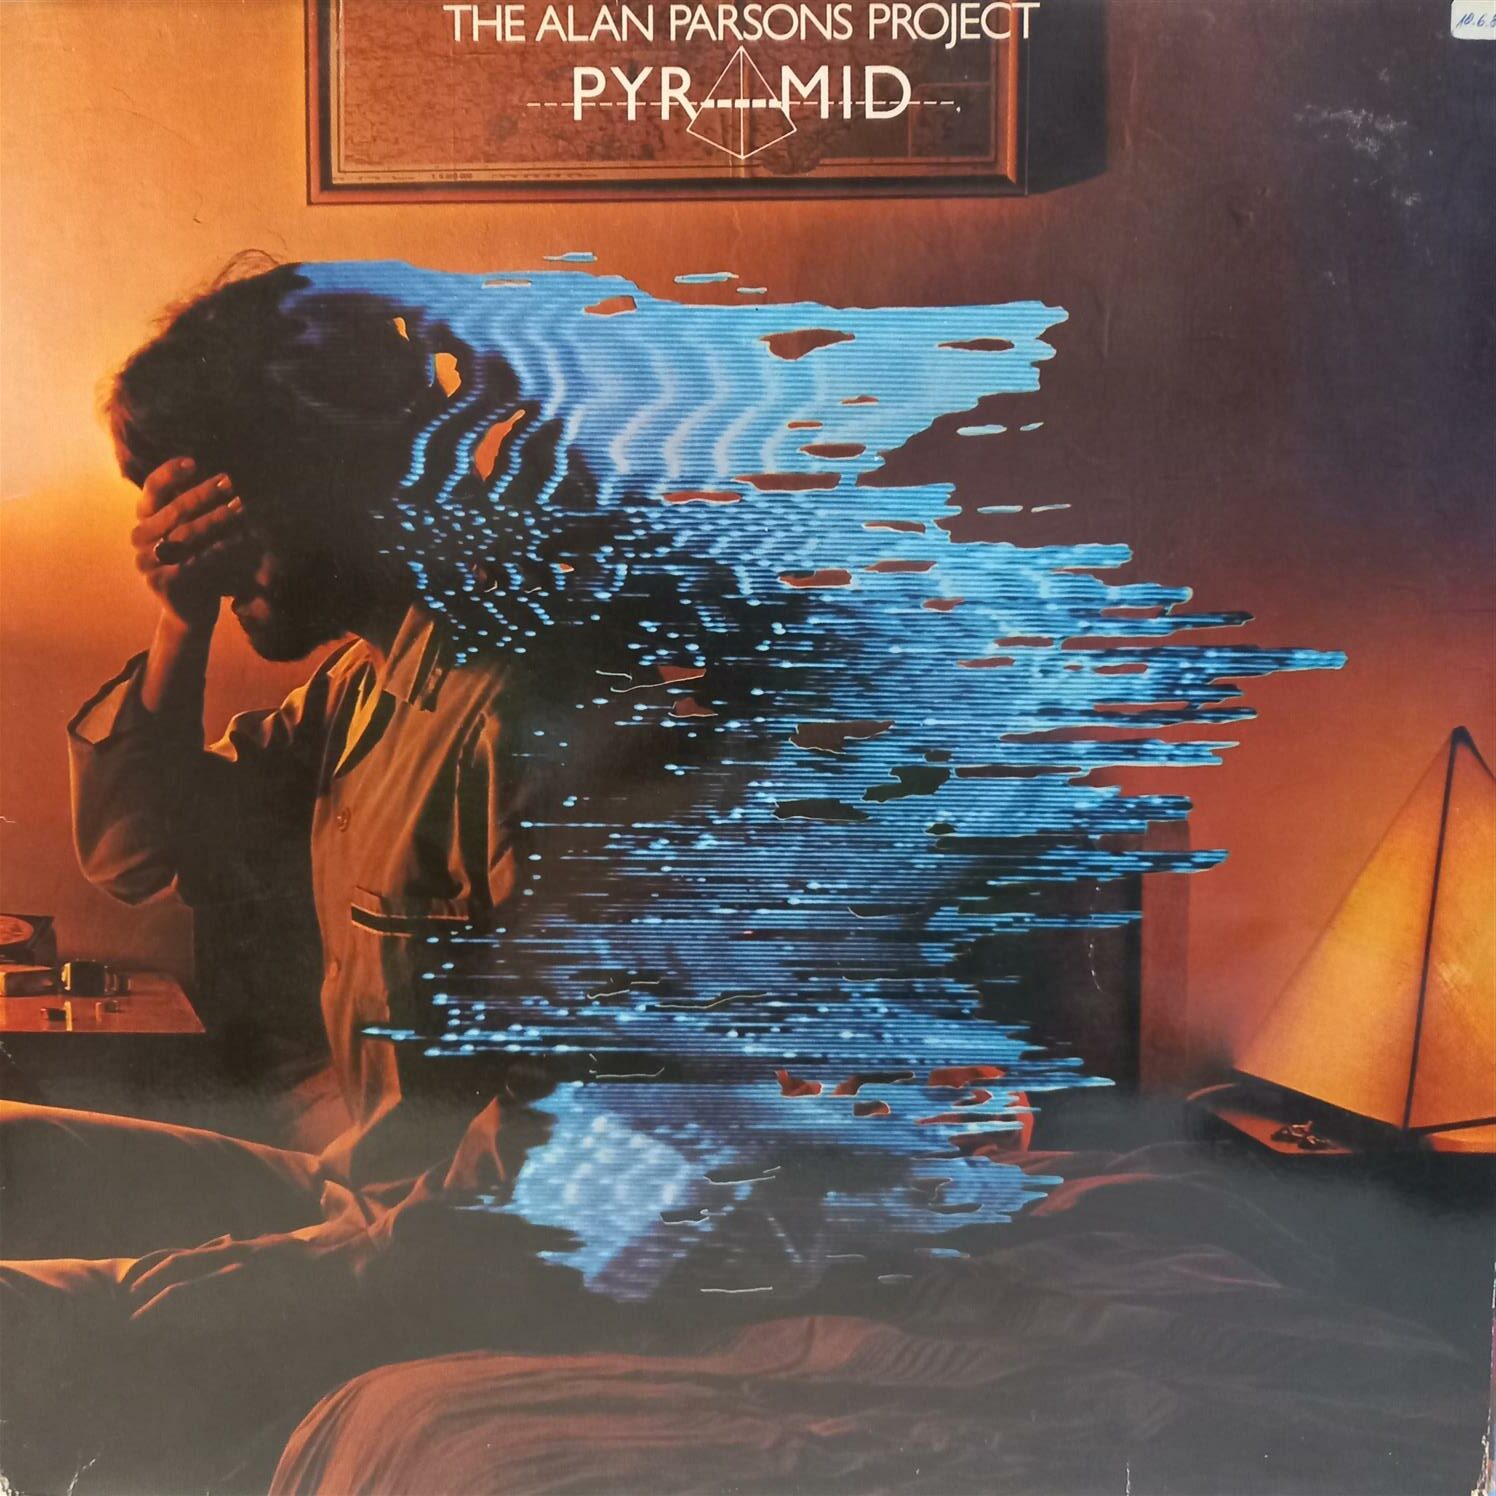 ALAN PARSONS PROJECT – PYRAMID ON